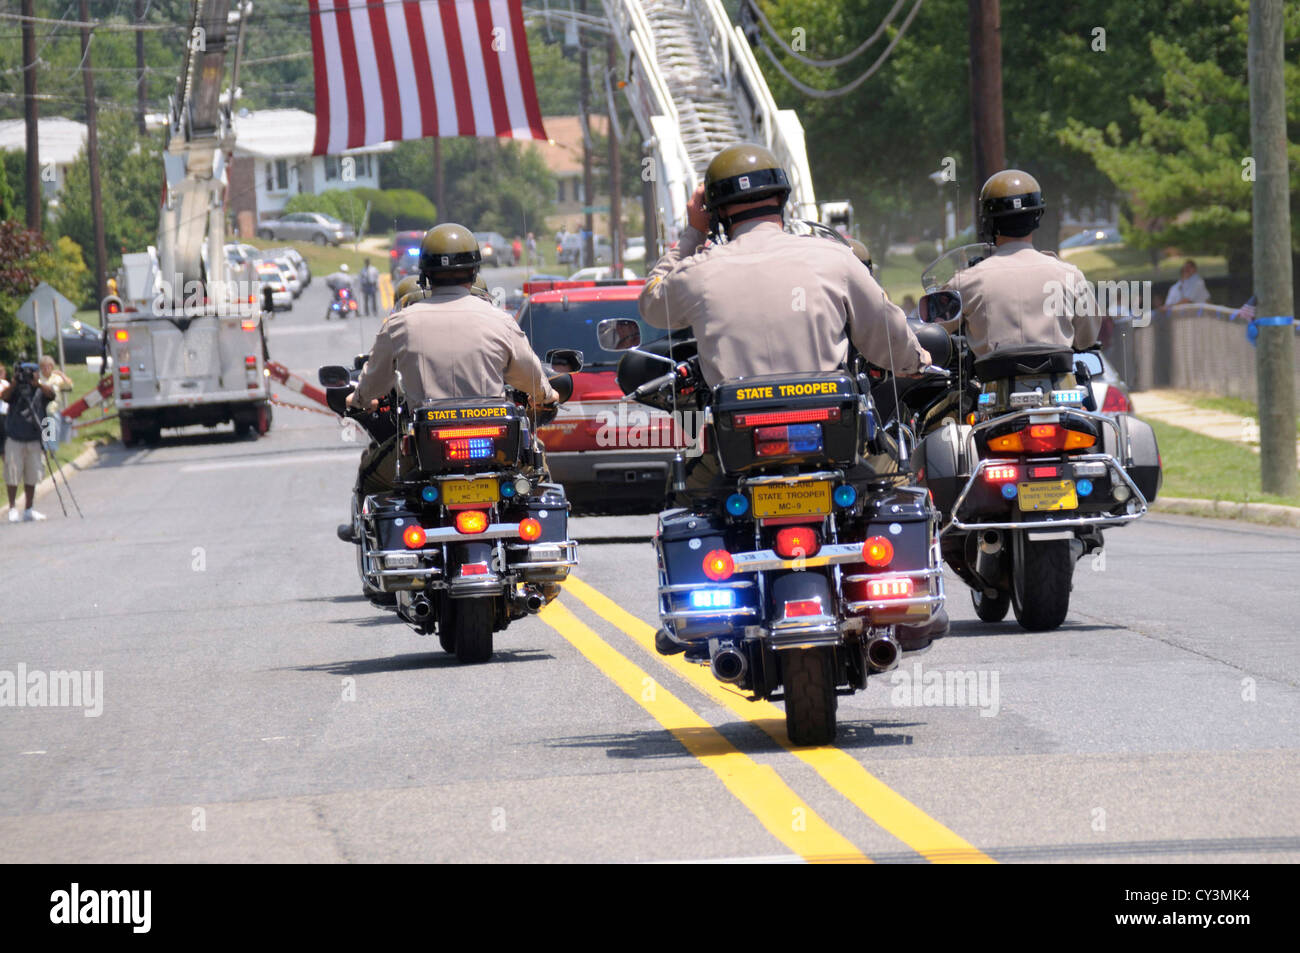 Police funeral escorted by state troopers on motorcycles Stock Photo